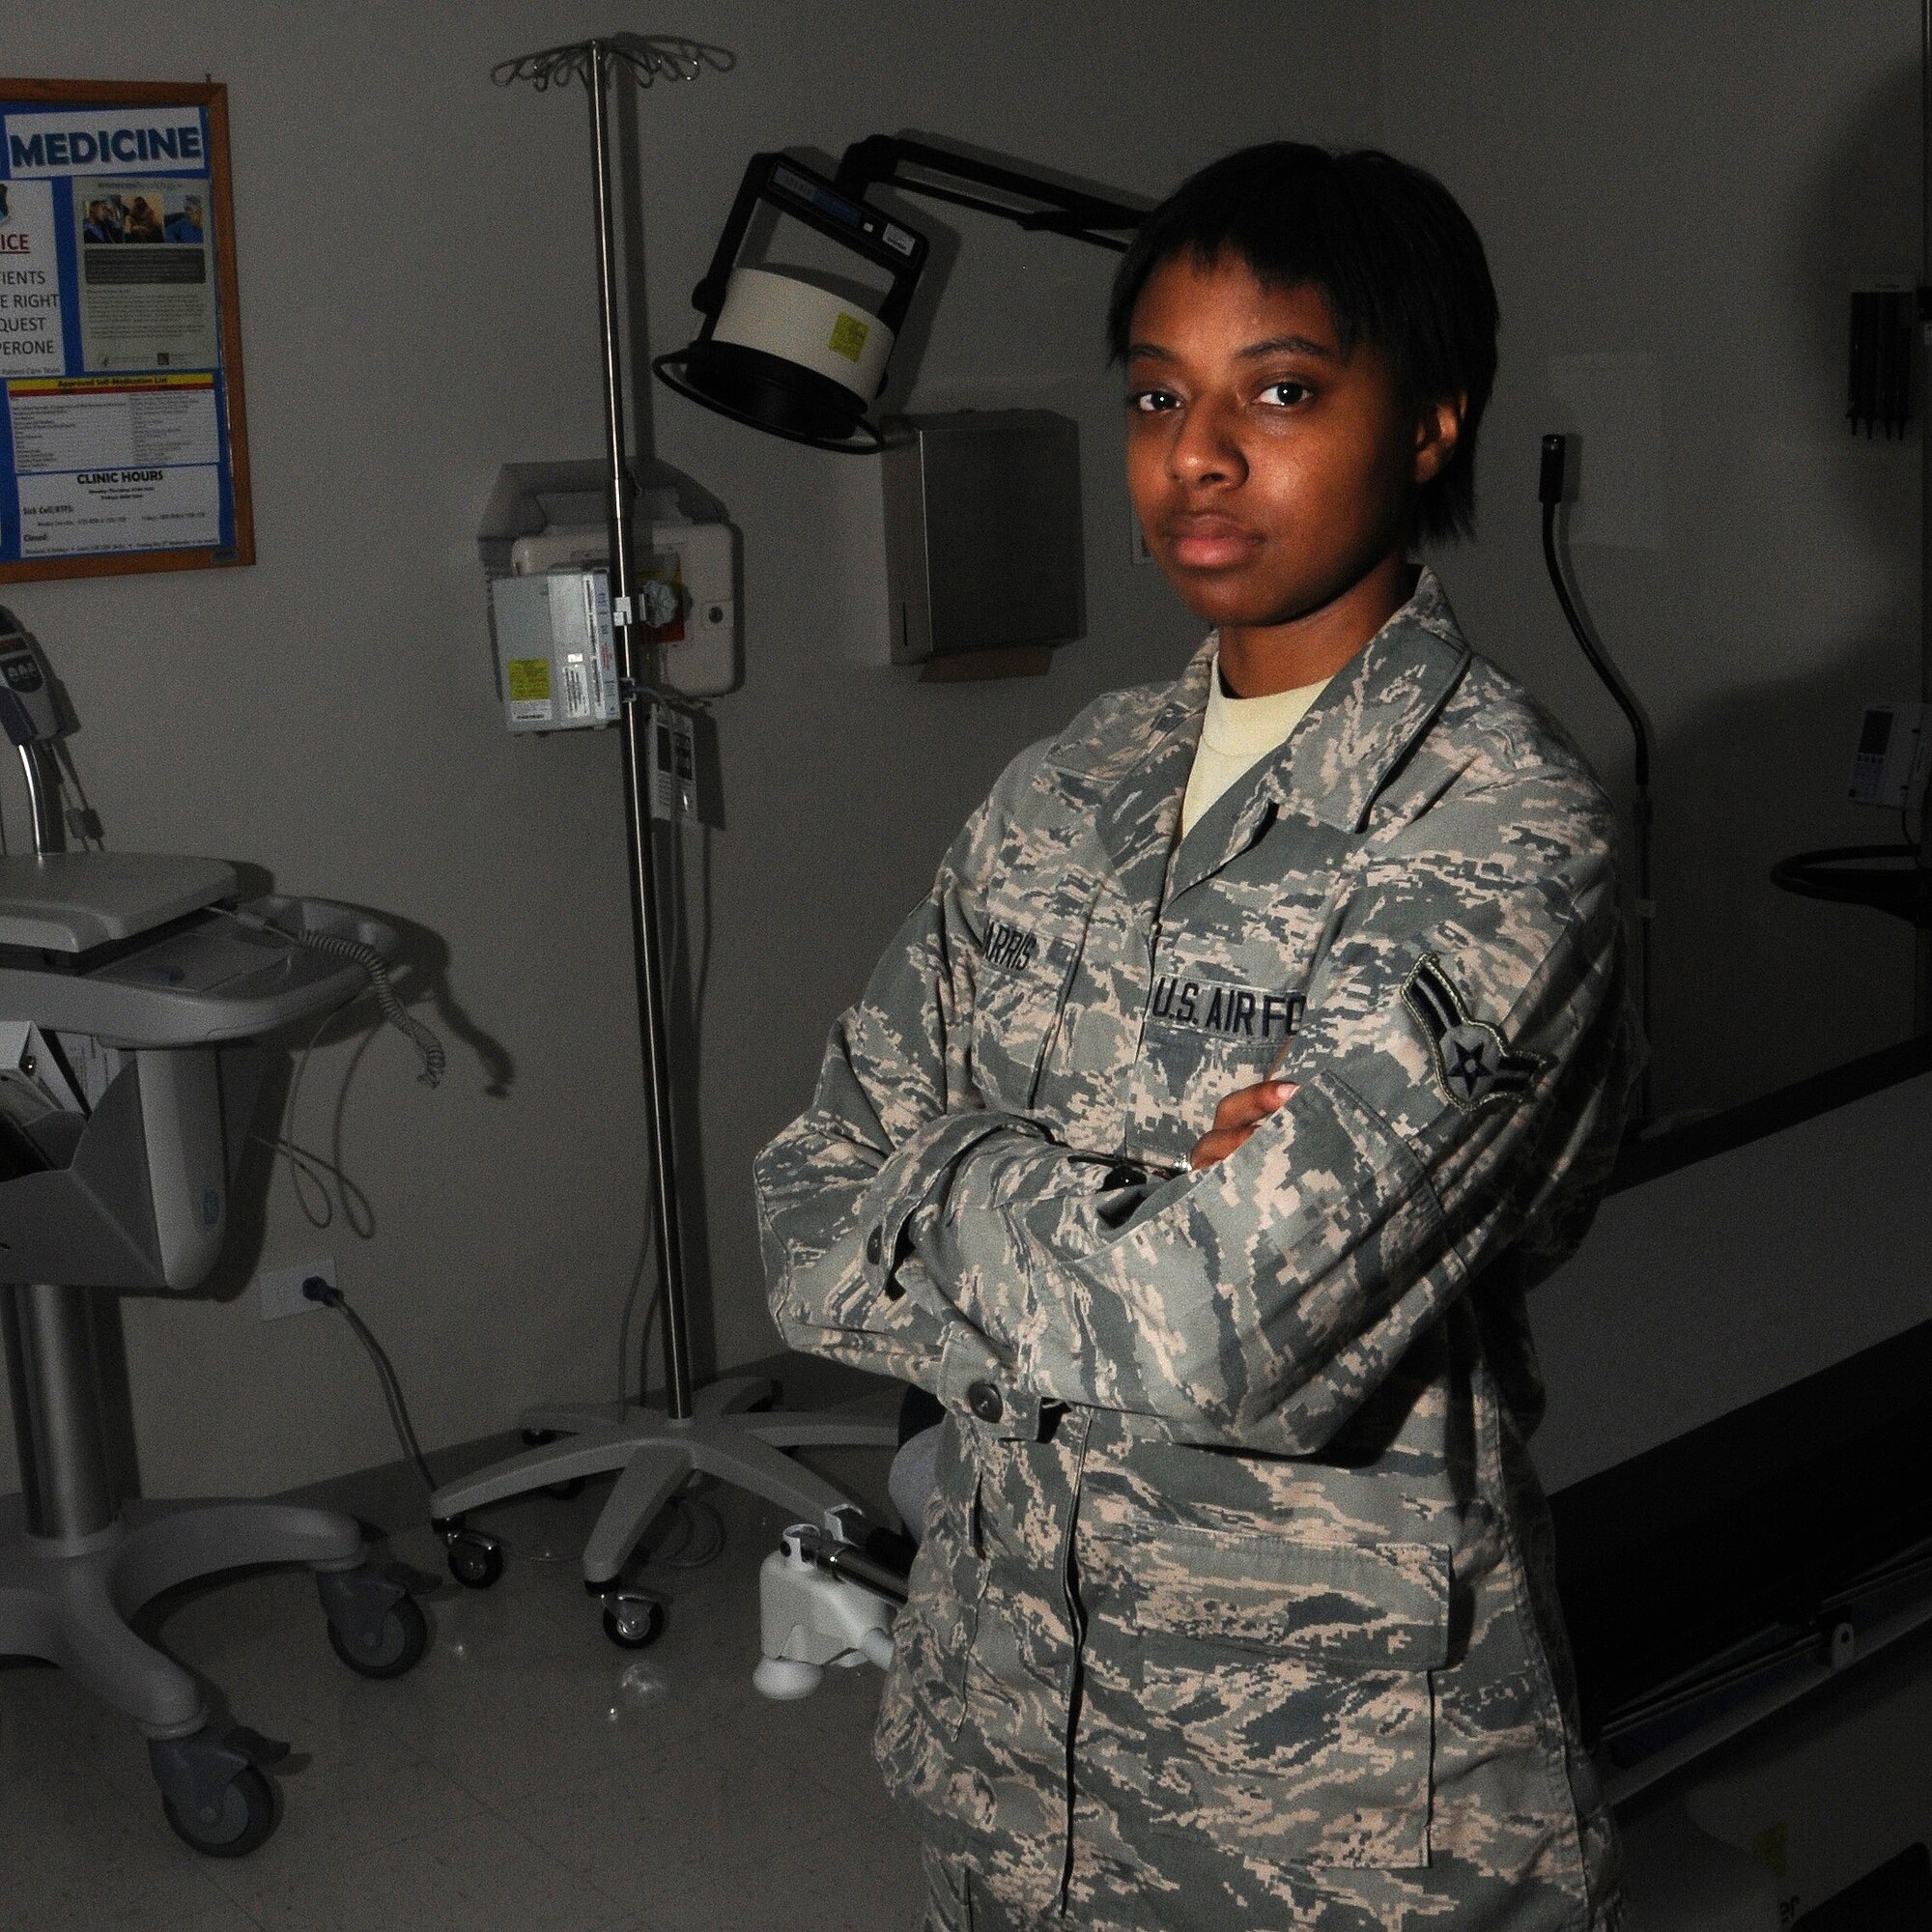 Airman 1st Class Ashli Harris, 47th Medical Group flight medicine technician, poses for a photo Aug. 21, 2014 at Laughlin Air Force Base. Harris came to the aid of a woman who was struck by a vehicle on Interstate 410 until an ambulance arrived to the scene. (U.S. Air Force photo by Airman 1st Class Ariel D. Delgado)(Released)